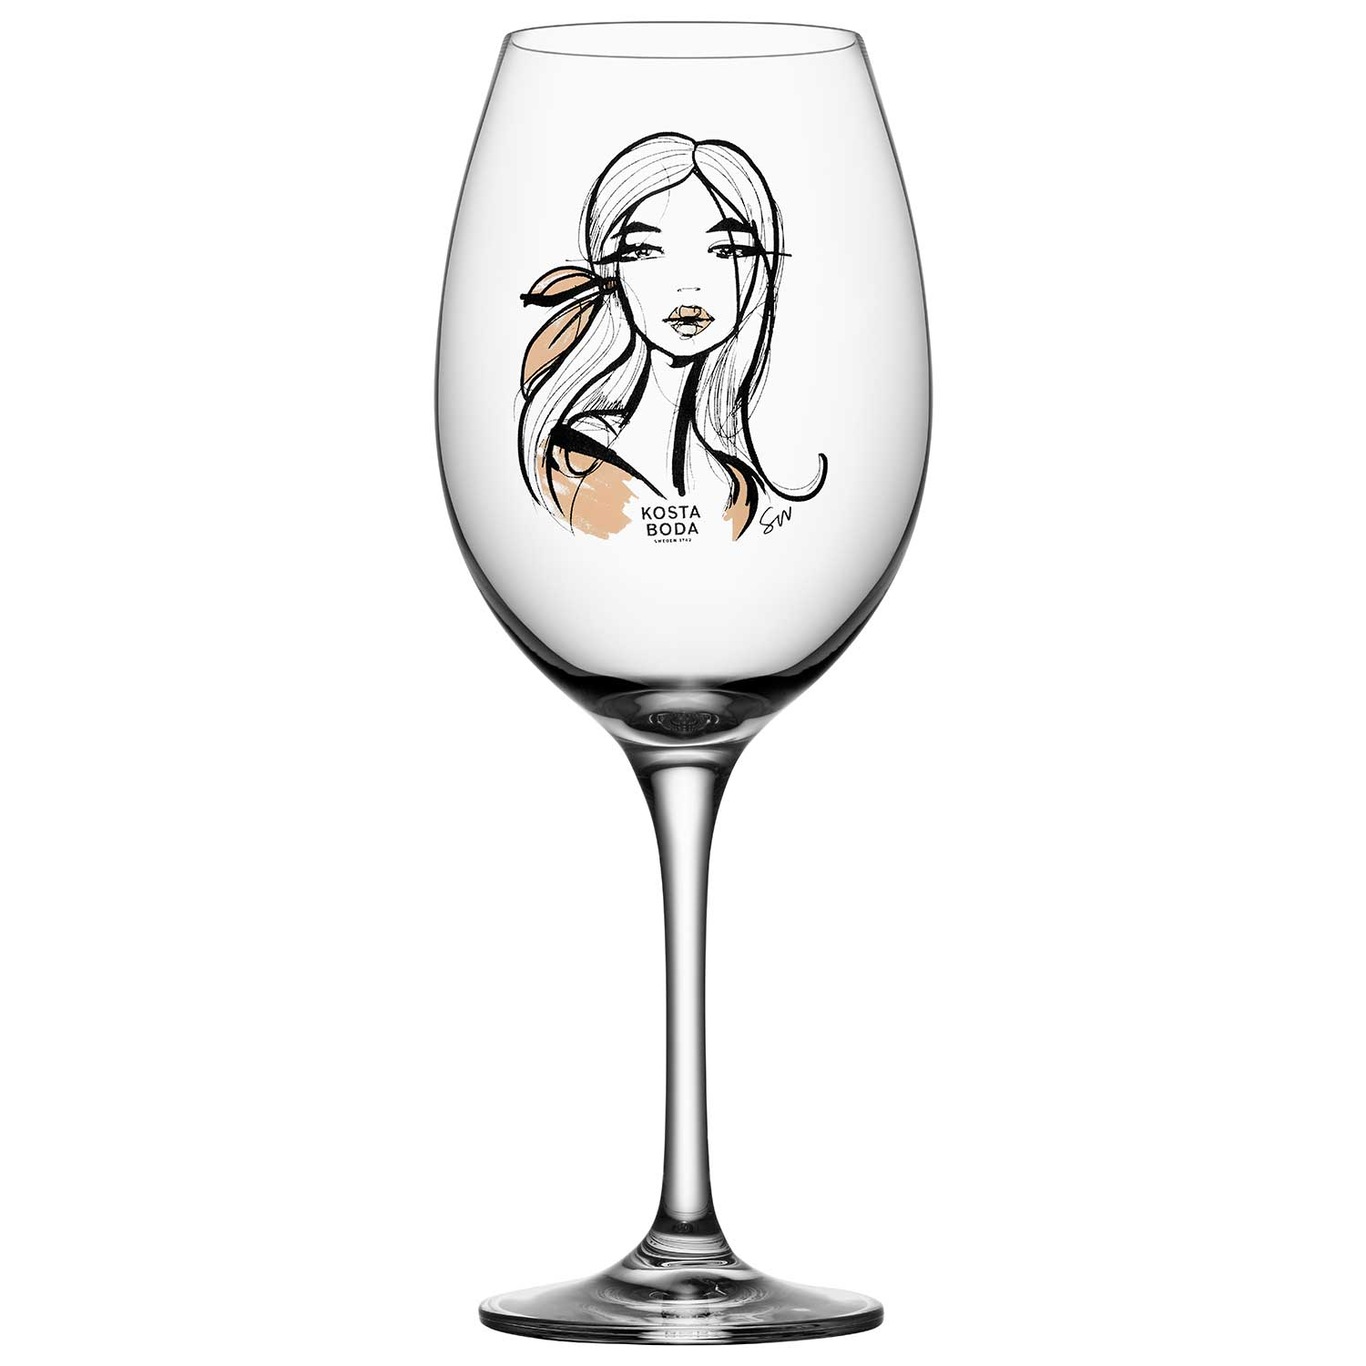 All About You Wine Glass 52 cl 2-pack, Wait For Her